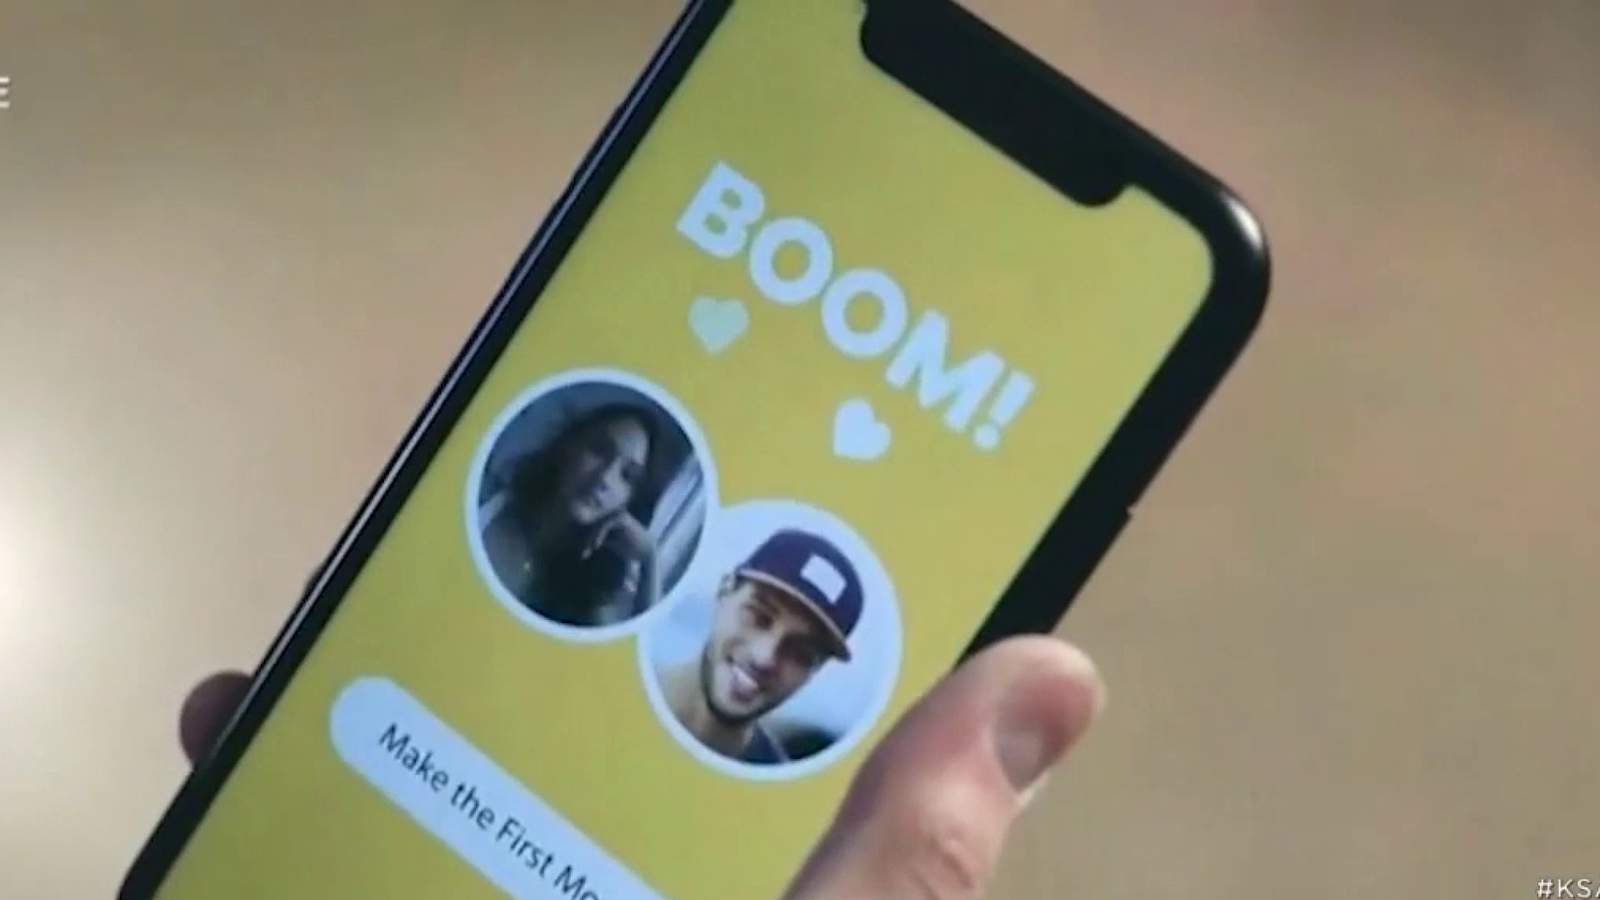 Bumble updates its terms to ban body shaming users